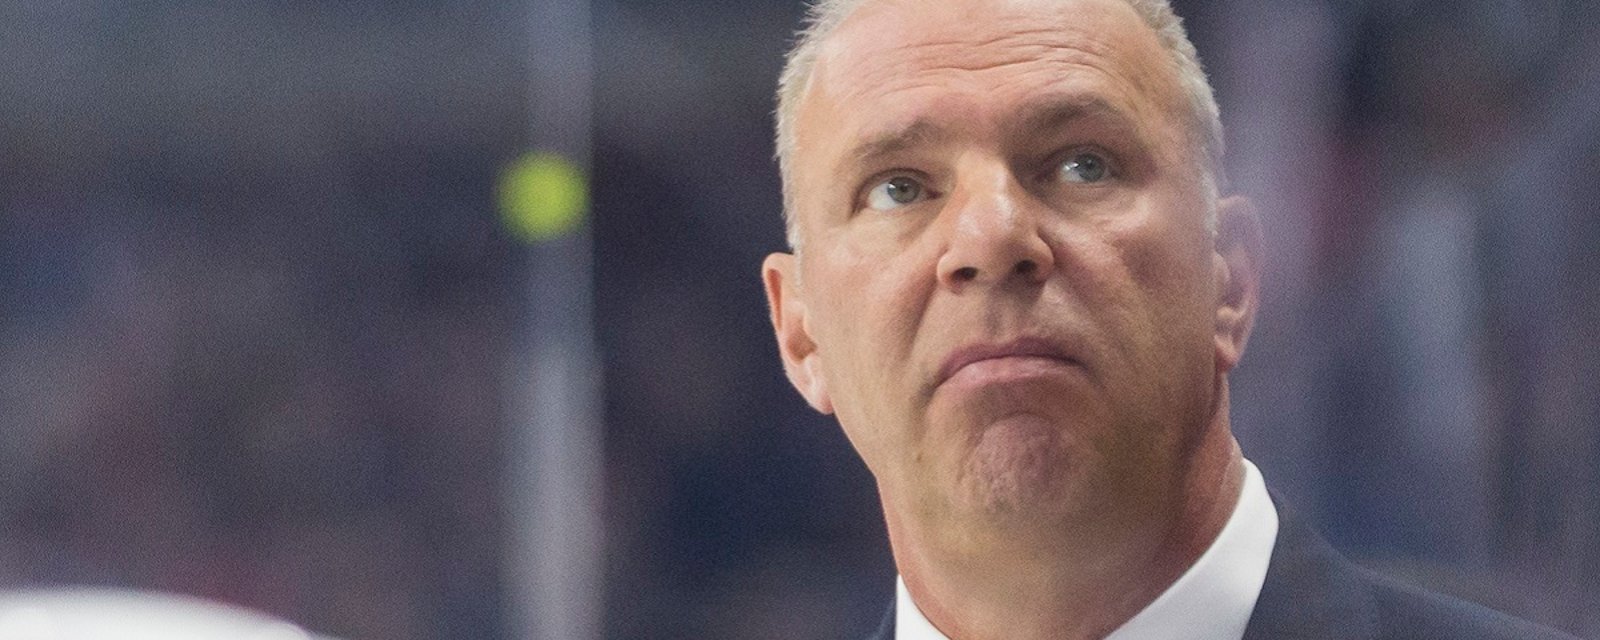 Breaking: Michel Therrien admits he crossed the line with P.K. Subban!